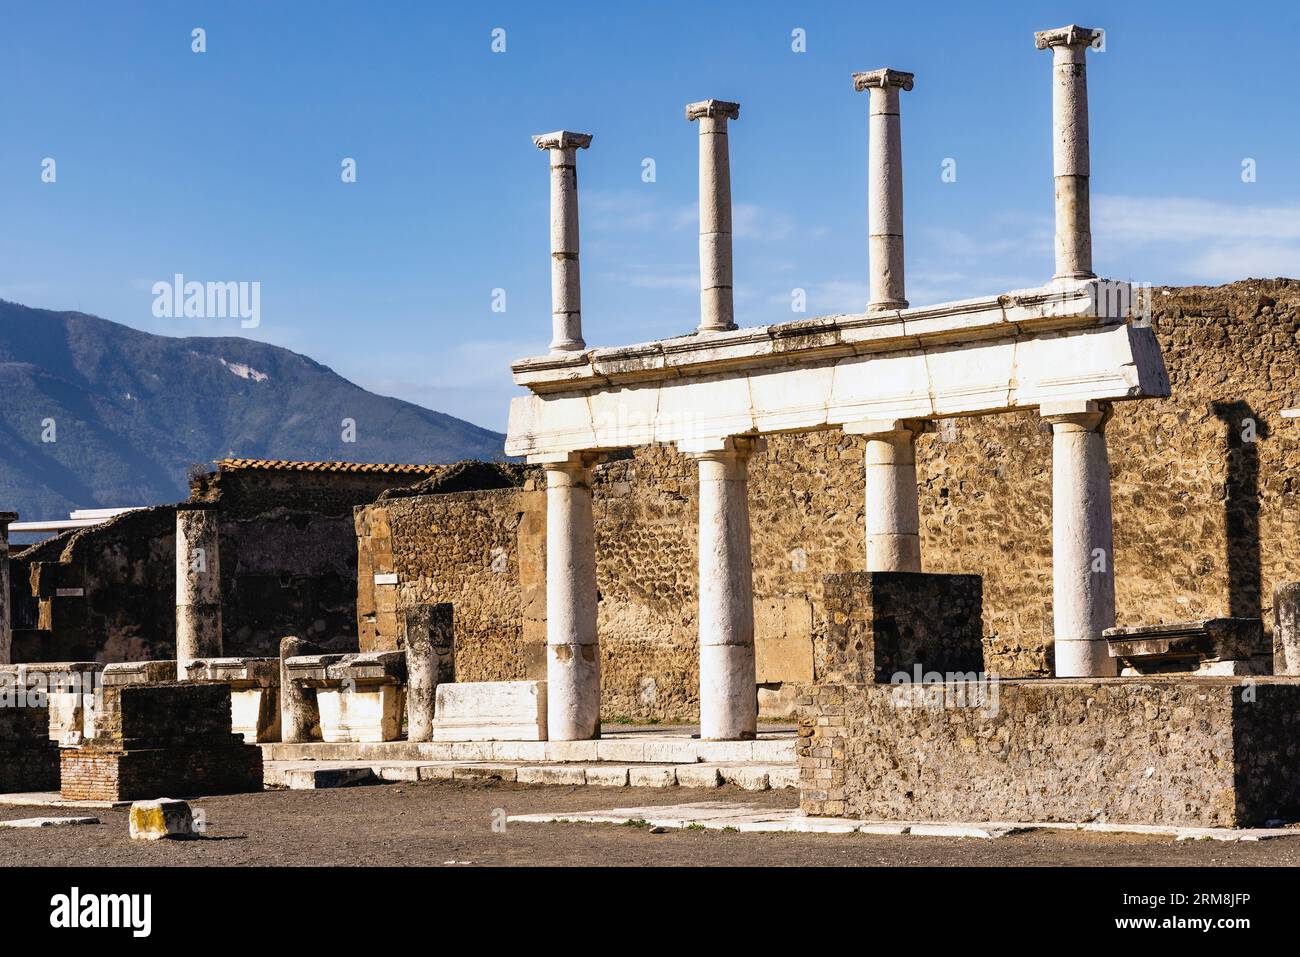 Pompeii Archaeological Site, Campania, Italy.  The Forum.  Pompeii, Herculaneum, and Torre Annunziata are collectively designated a UNESCO World Herit Stock Photo